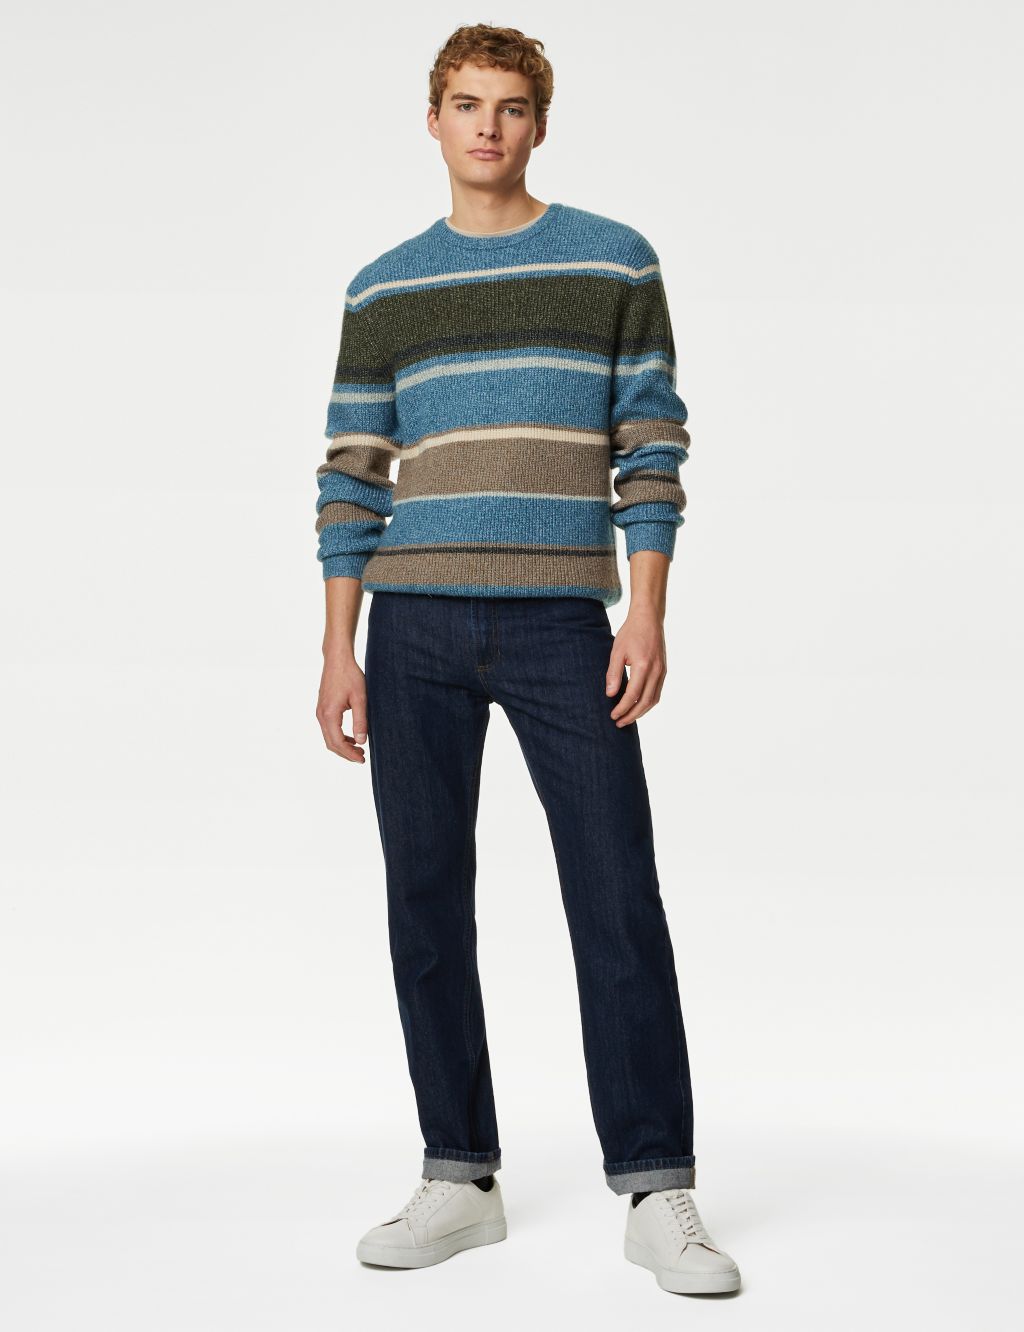 Supersoft Striped Chunky Crew Neck Jumper image 1